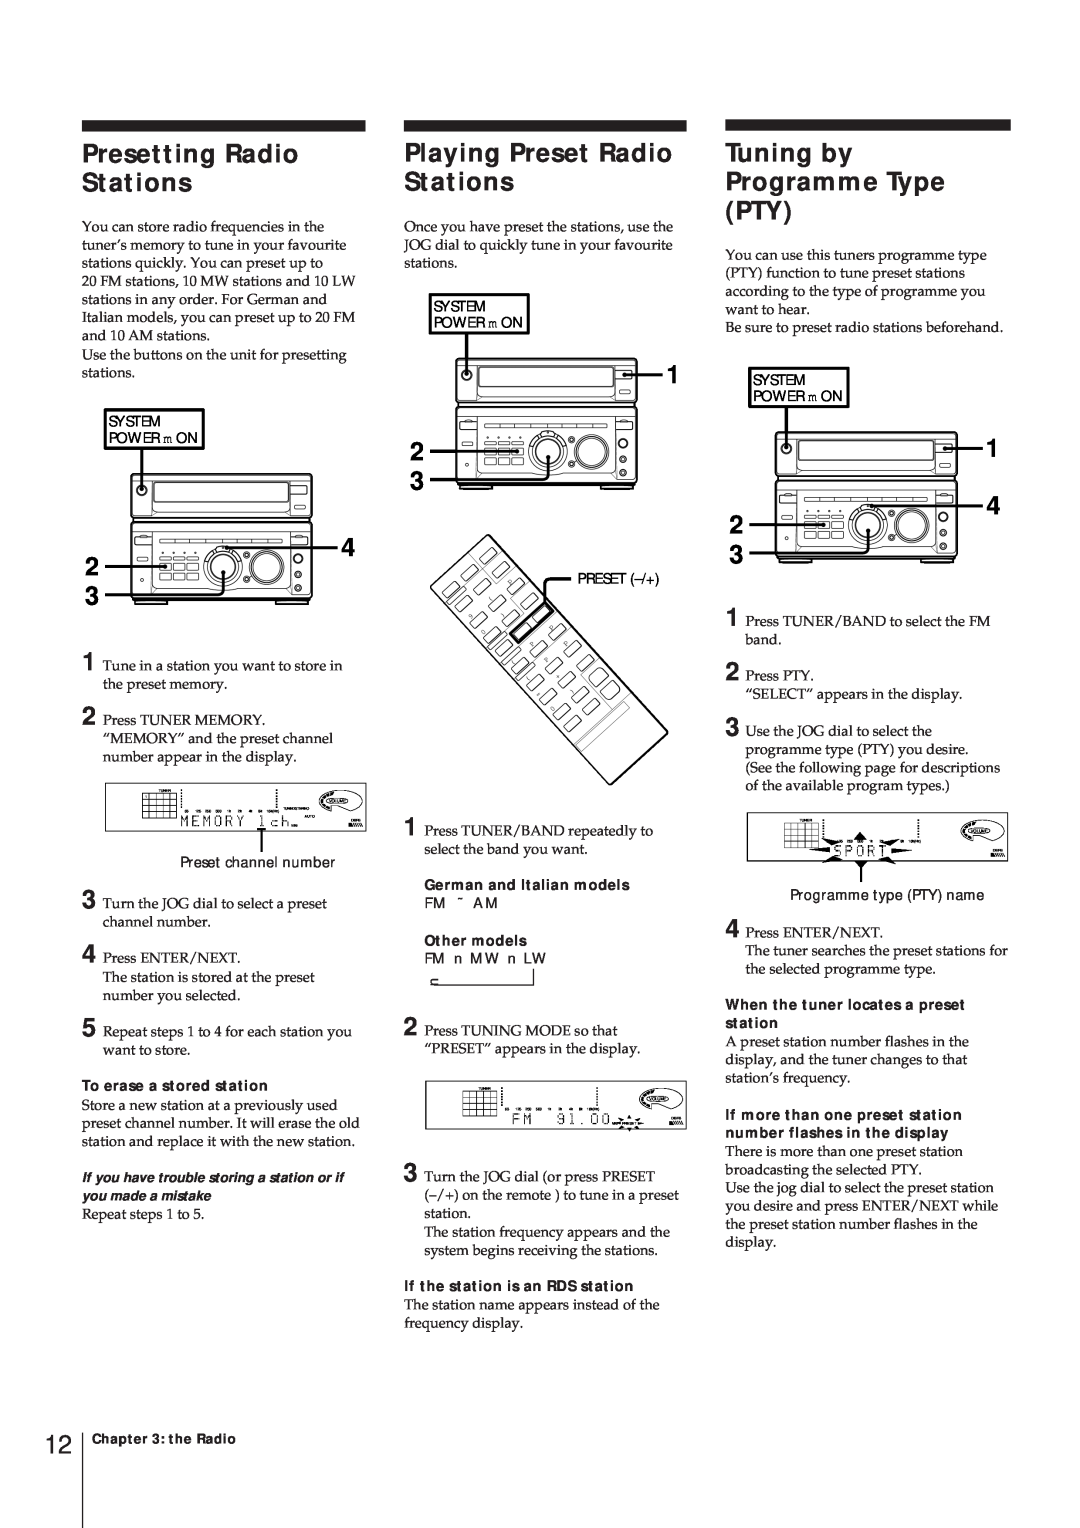 Sony MHC-W55 manual To erase a stored station, German and Italian models, Other models, If the station is an RDS station 